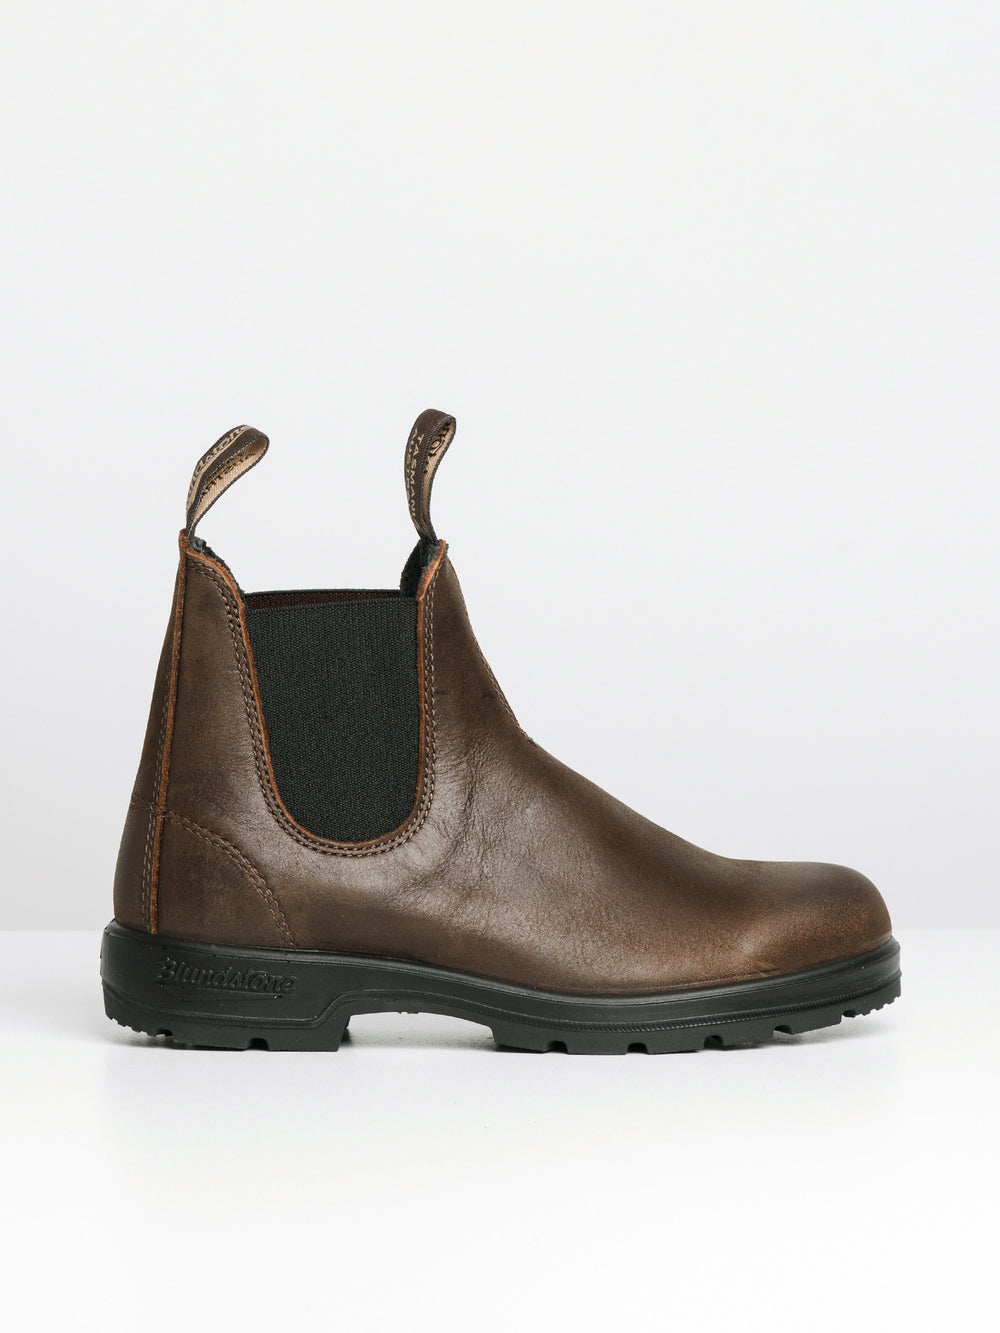 WOMENS BLUNDSTONE CLASSIC ANTIQUE BROWN